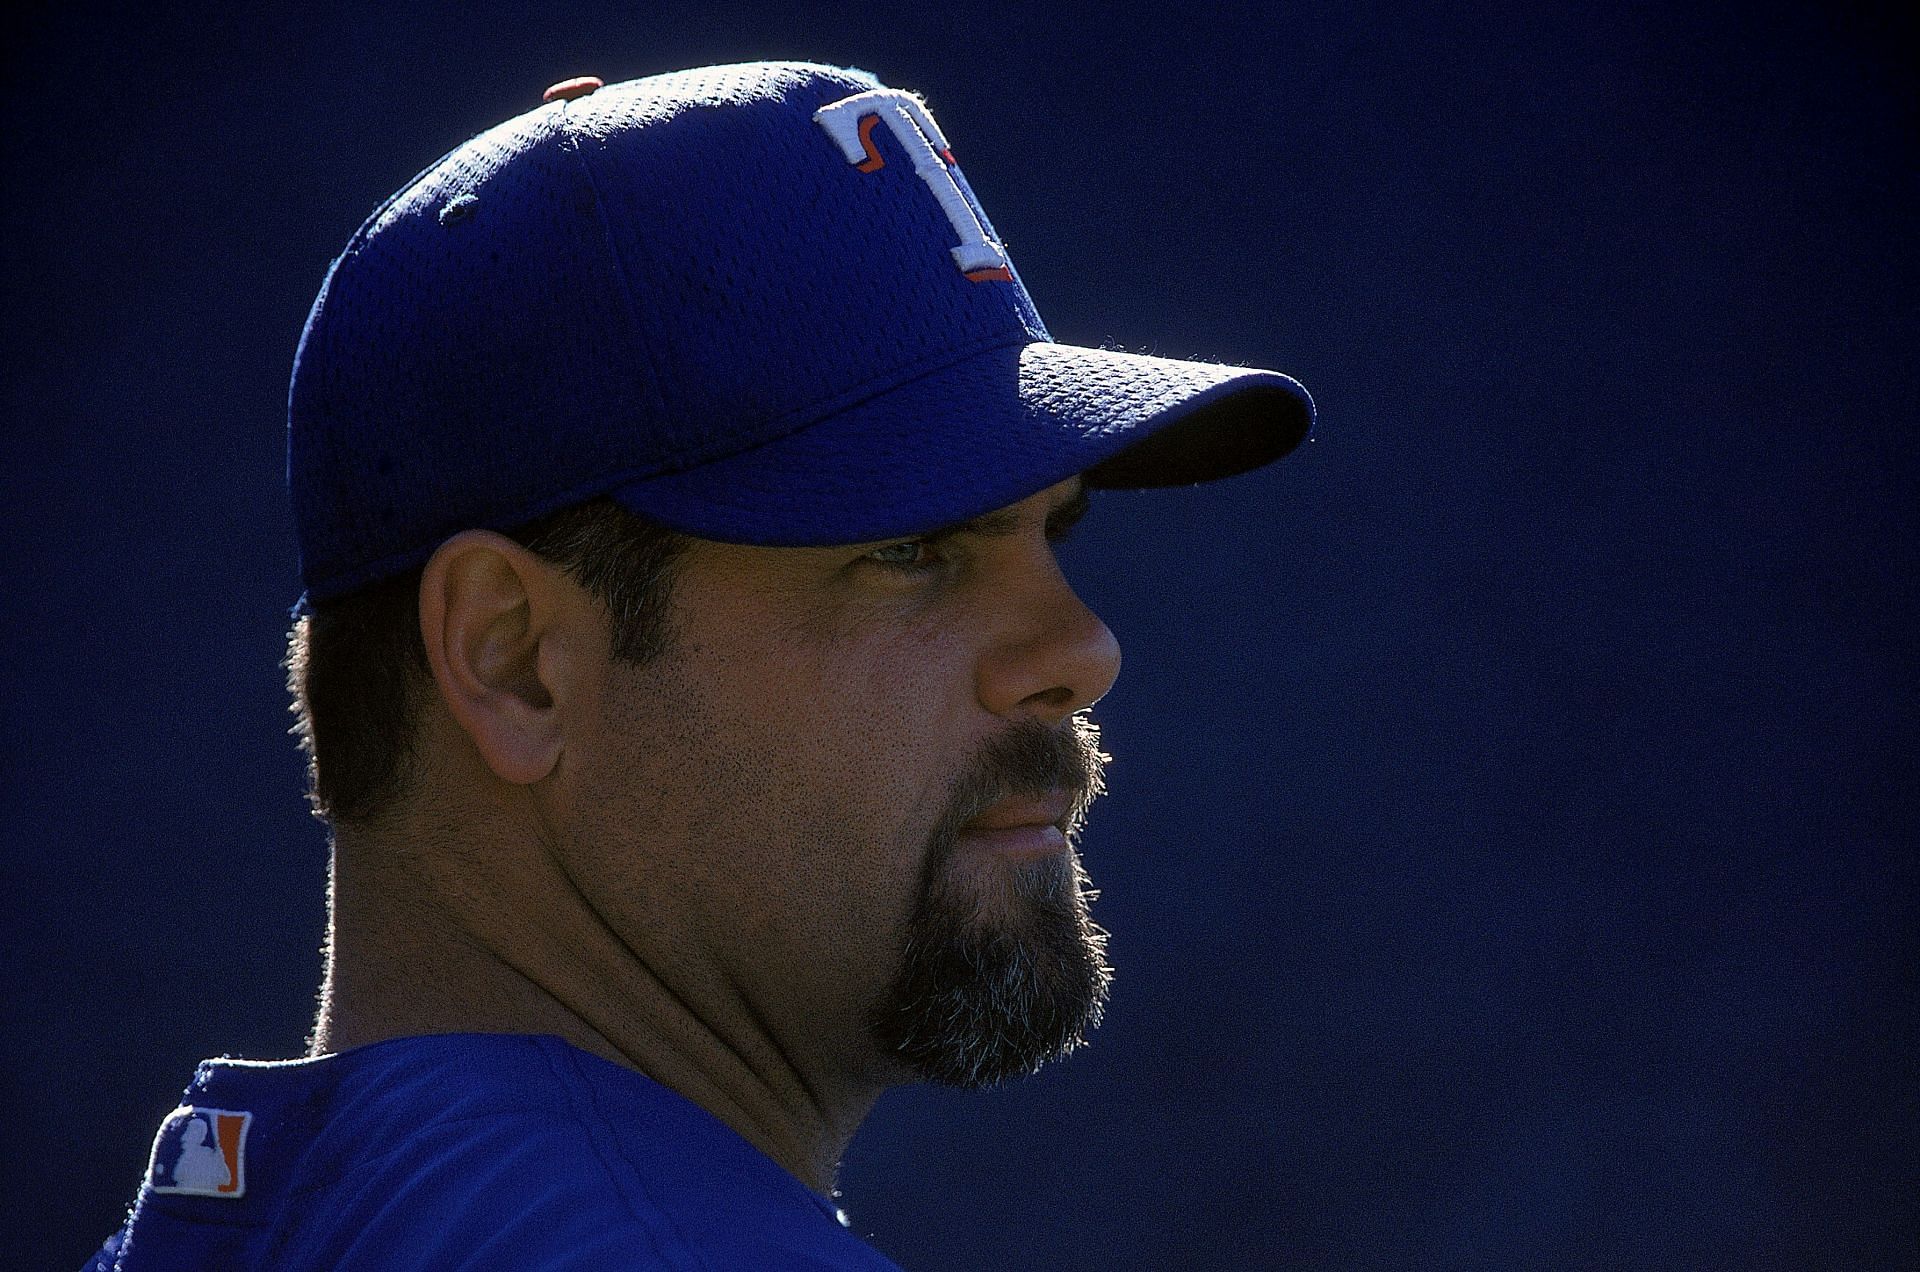 10 things we learned about former Astros star Ken Caminiti in new